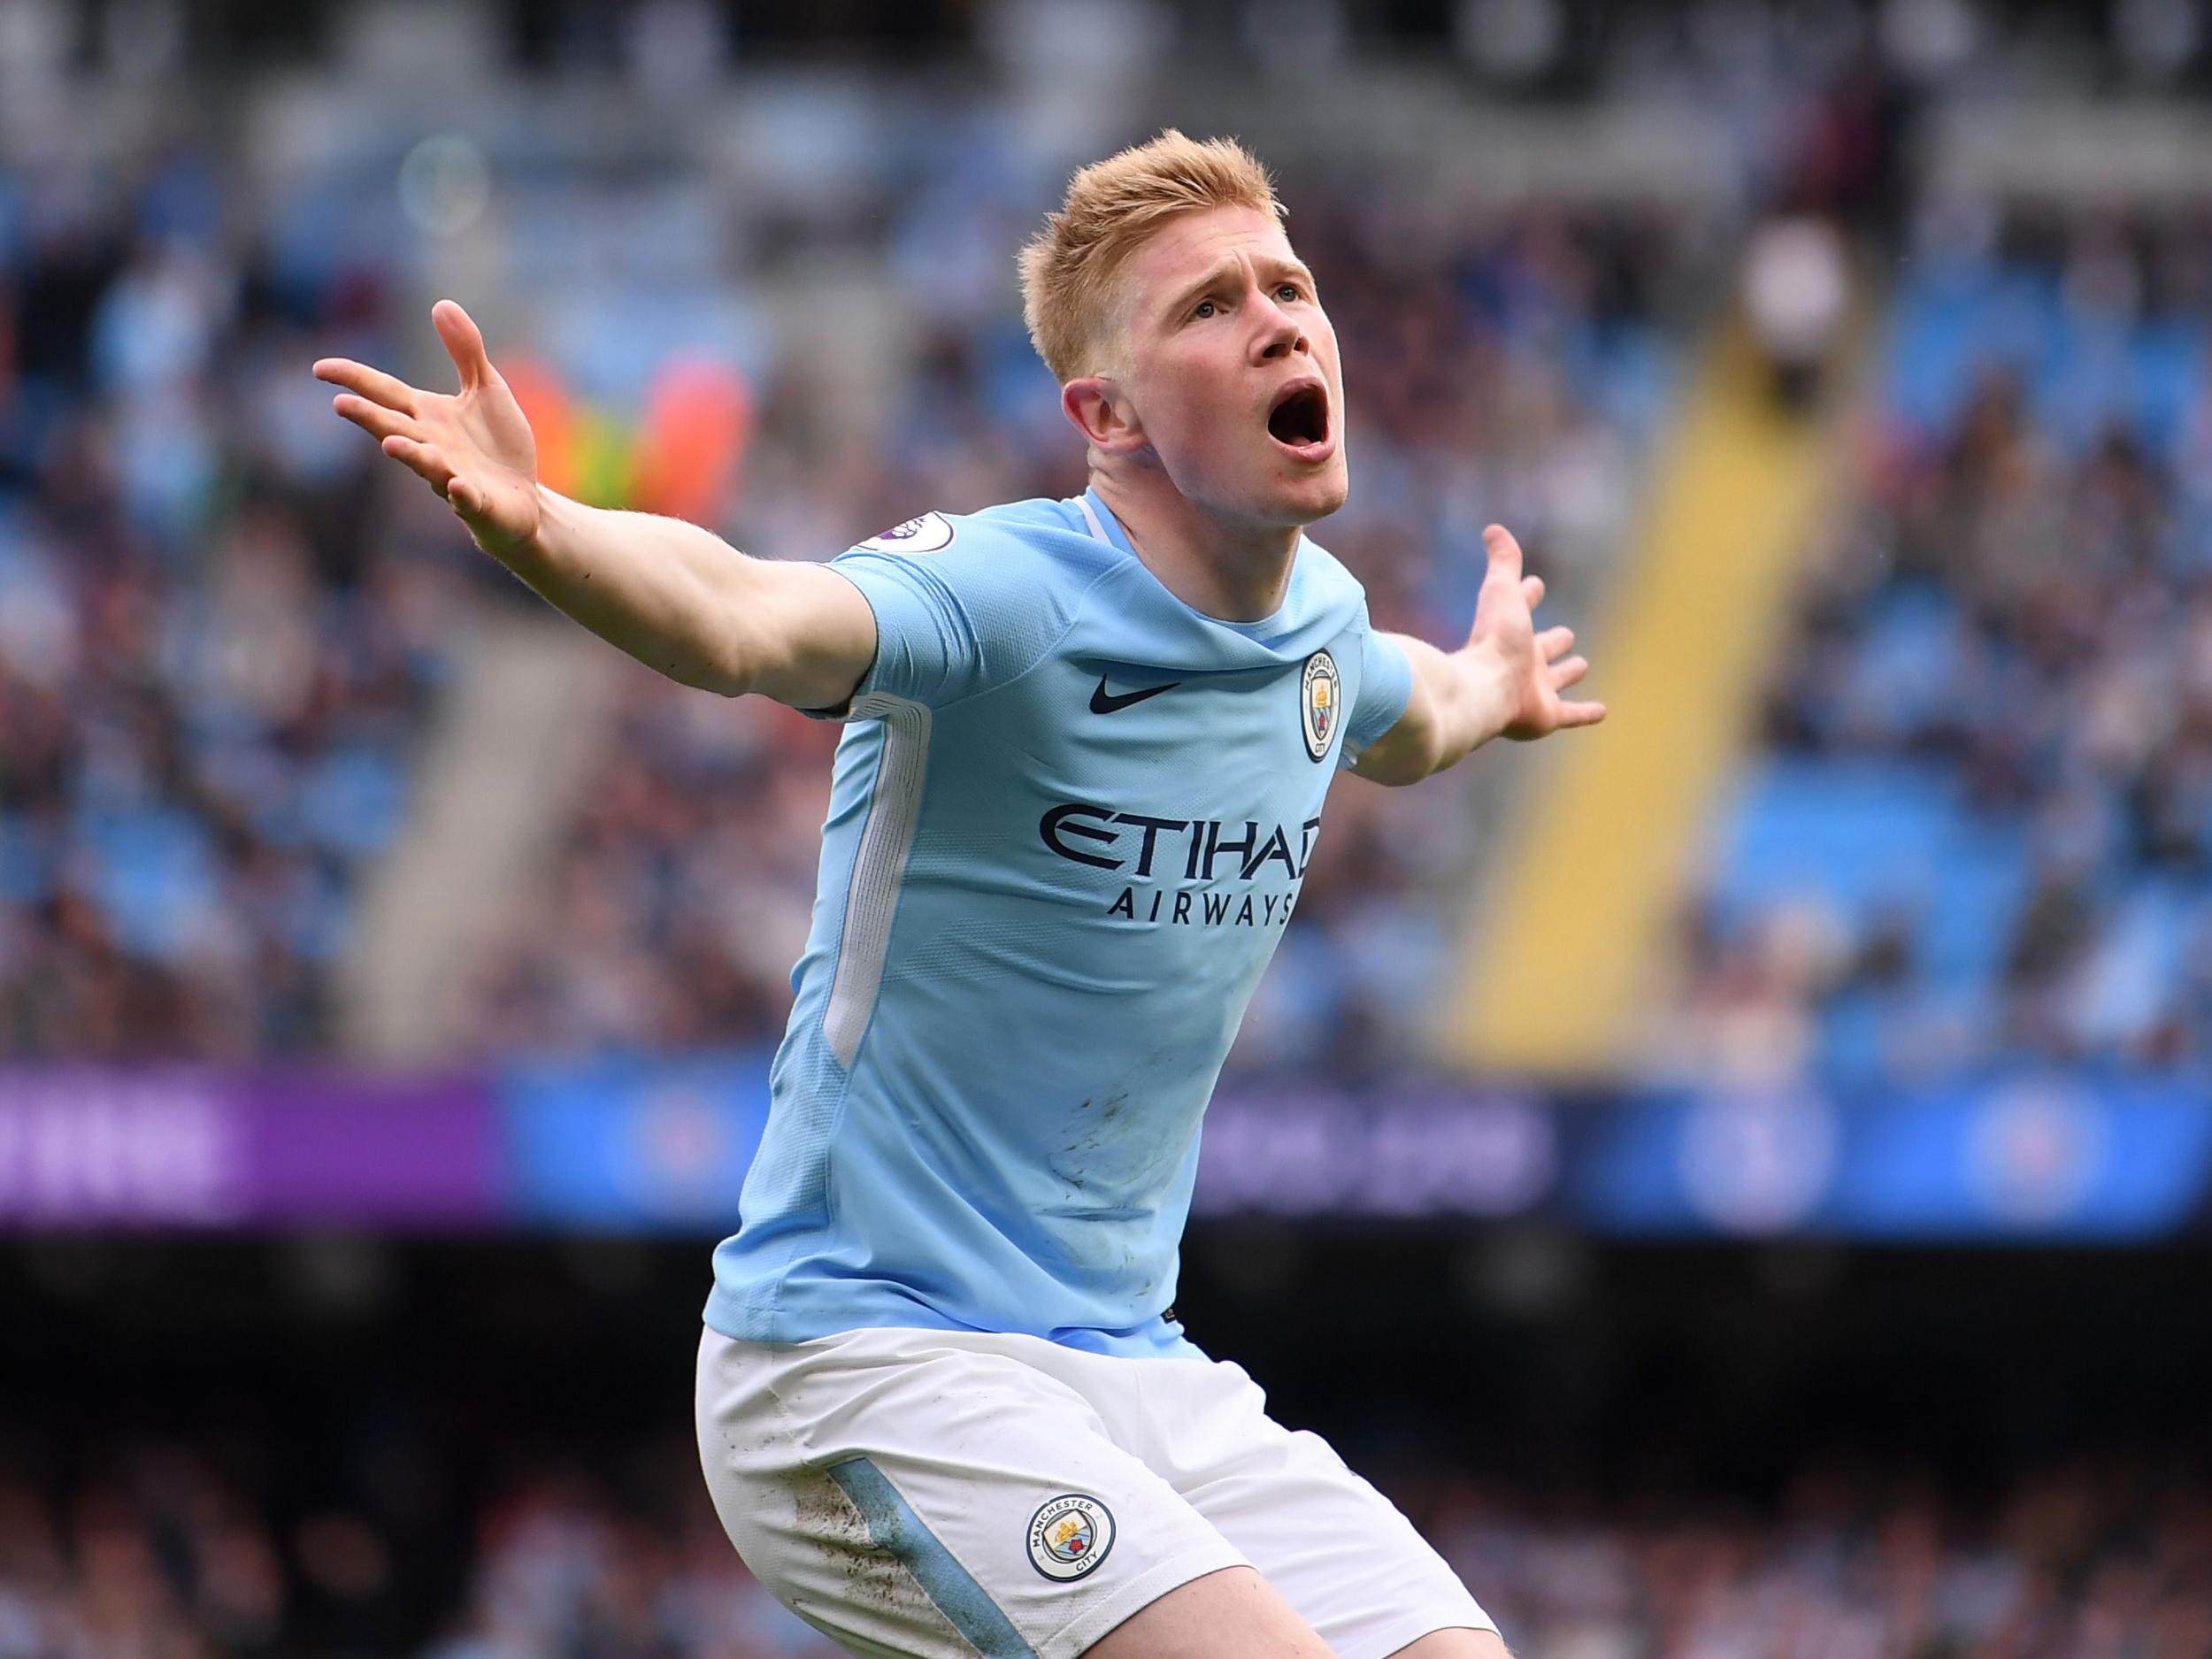 Kevin de Bruyne has been Manchester City's outstanding player this season